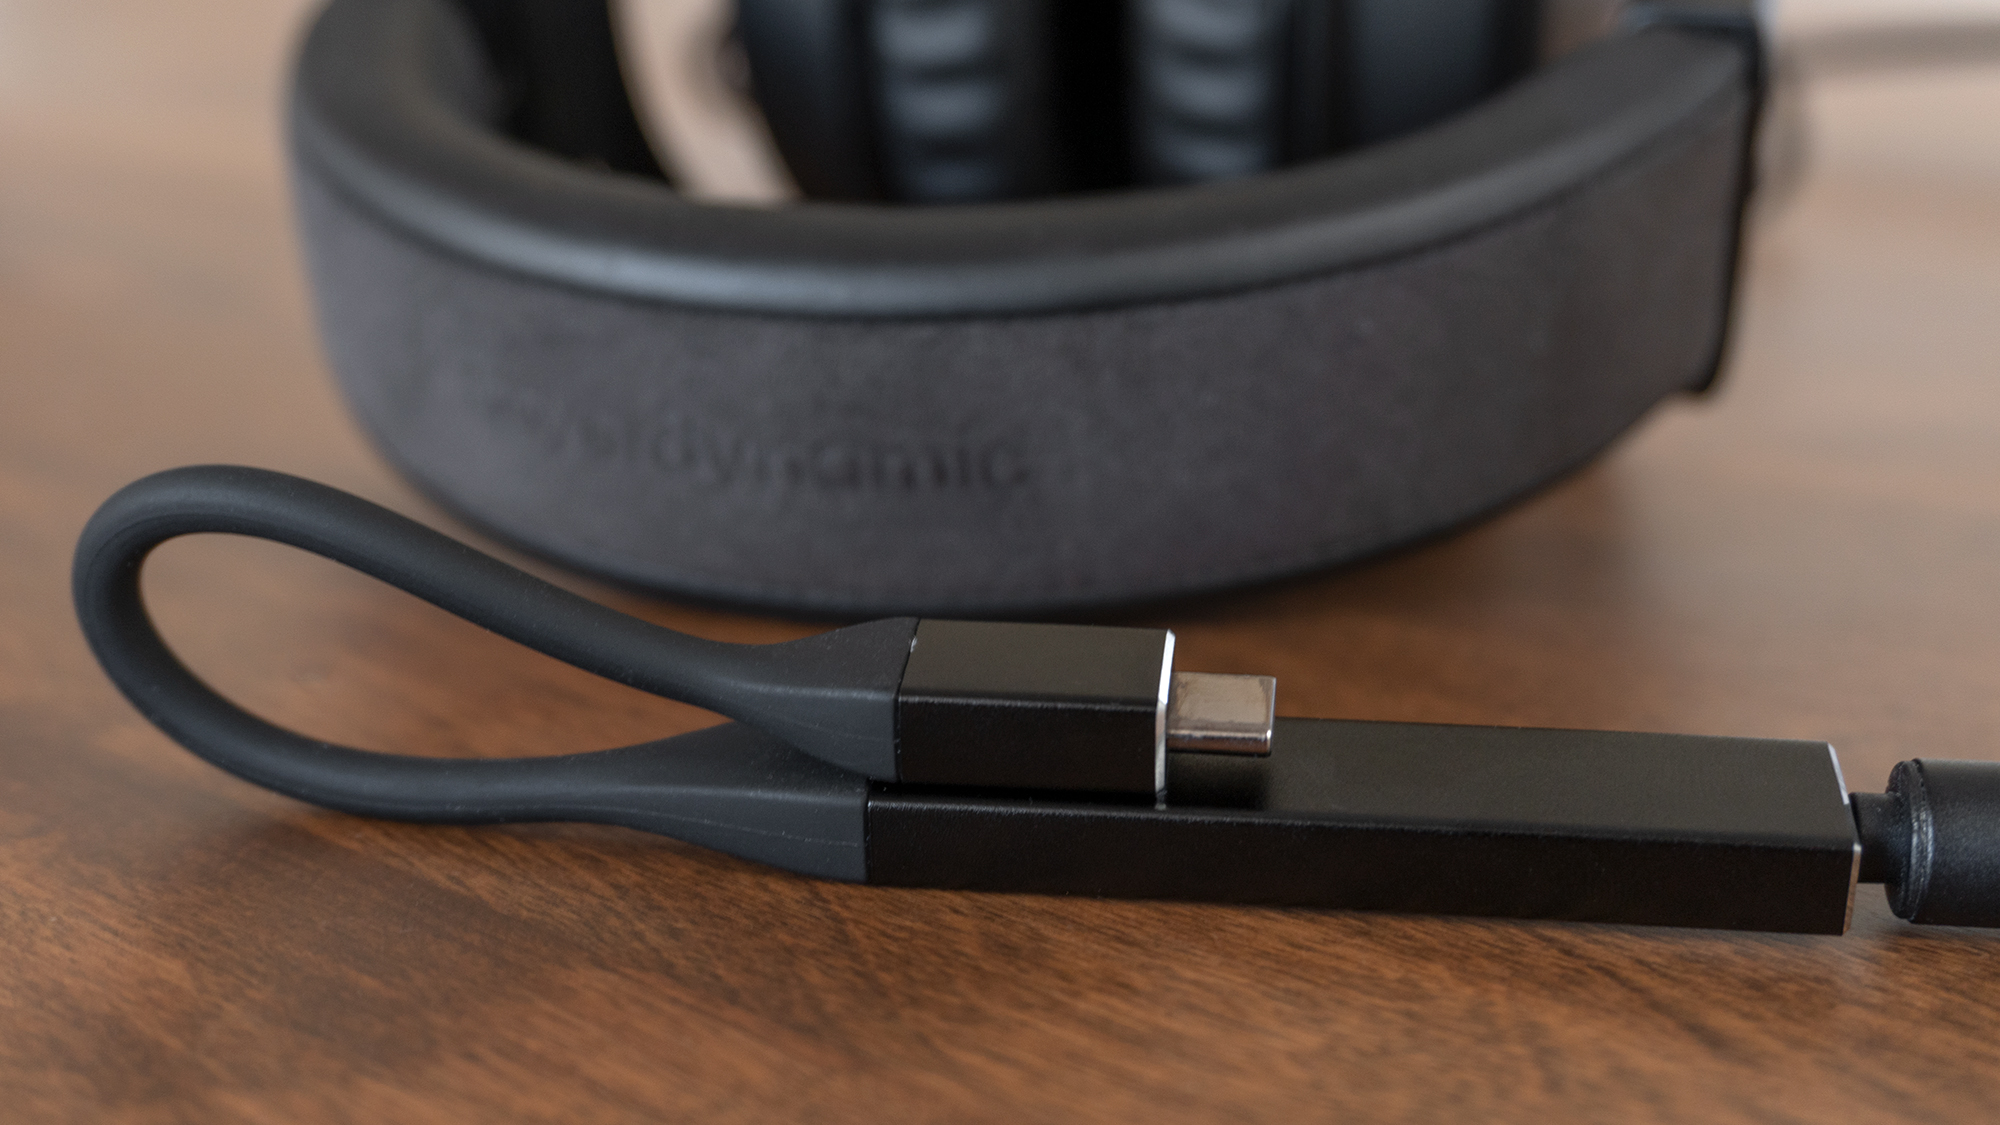 The THX Onyx is small and easy to pocket, and even features a magnetic closure so you can create a loop to help wrangle and organise headphone cables. (Photo: Andrew Liszewski/Gizmodo)